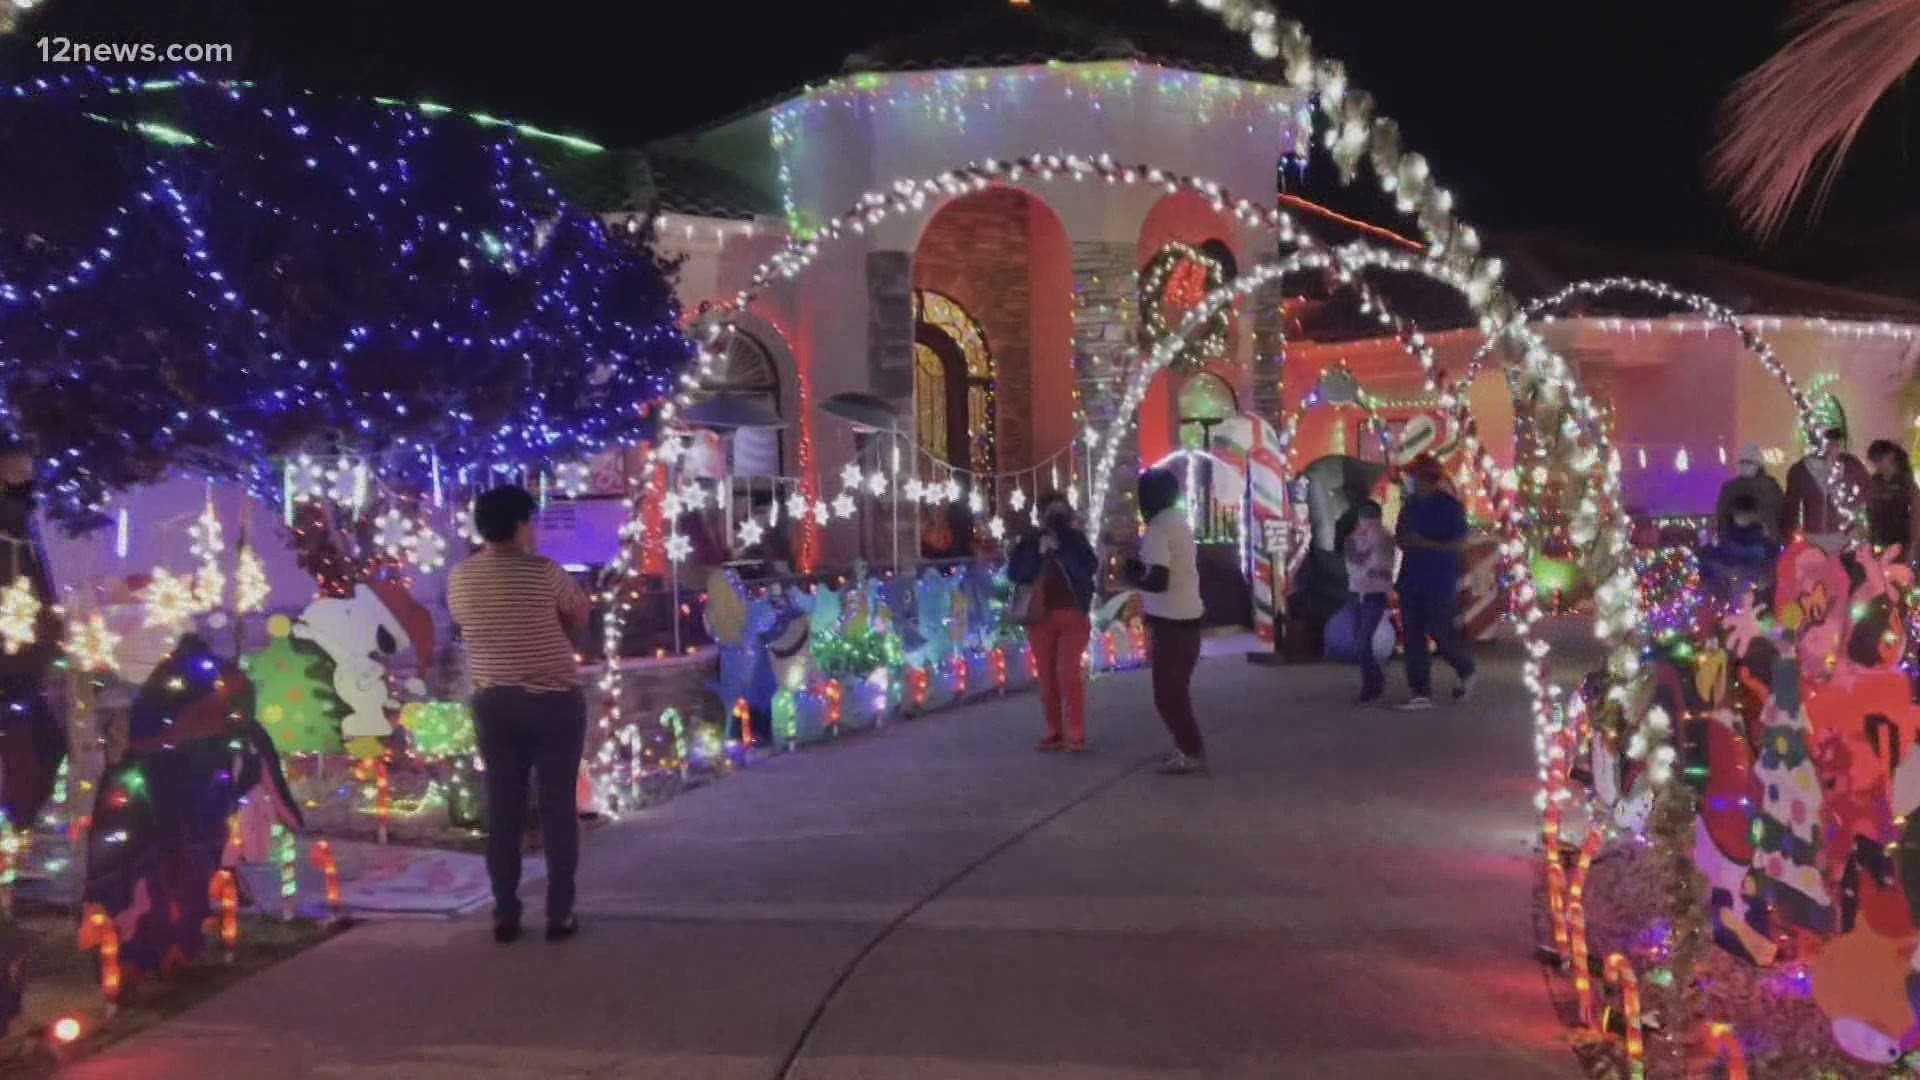 For one Ahwatukee family, the holidays mean a big Christmas light display. We got a sneak peek of the display before it comes to an end this year.